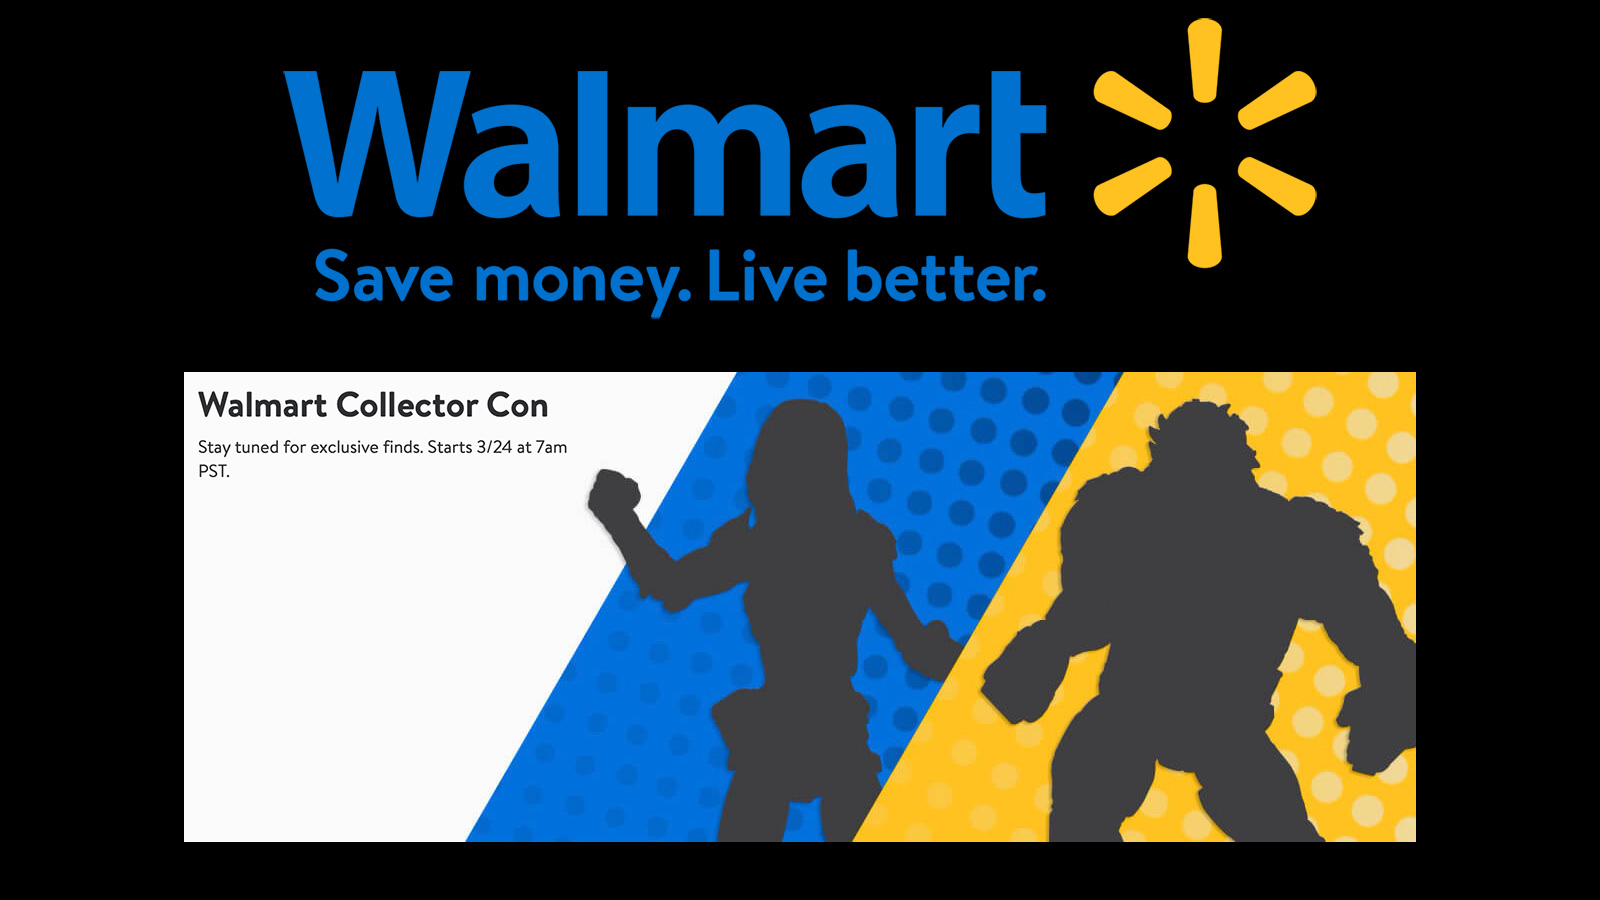 Walmart Collector Con 2022 - Starts 3/24 At 7am PST